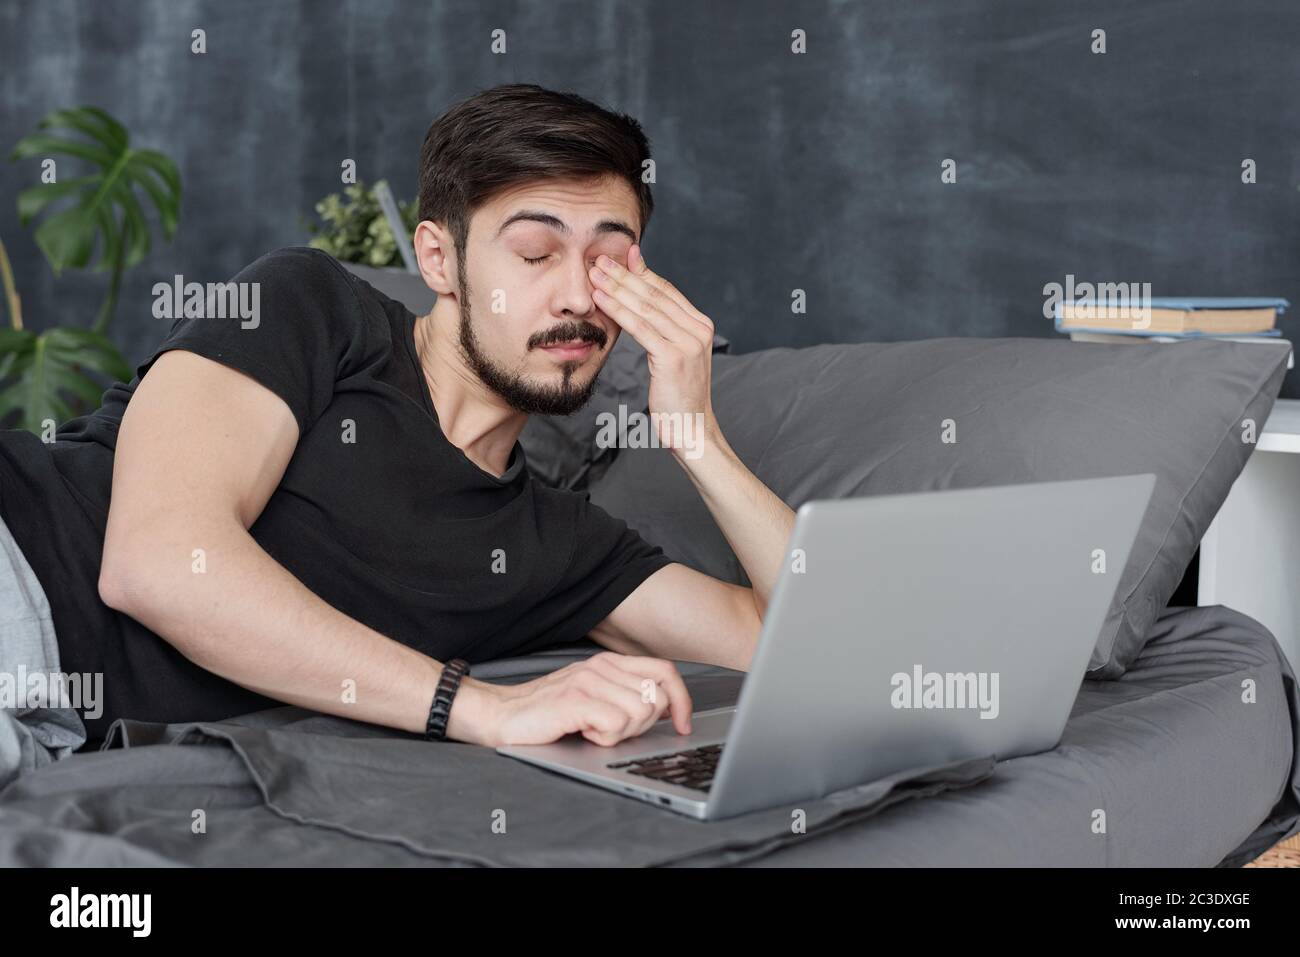 Tired young man having eye fatigue lying on bed with laptop and rubbing eye Stock Photo